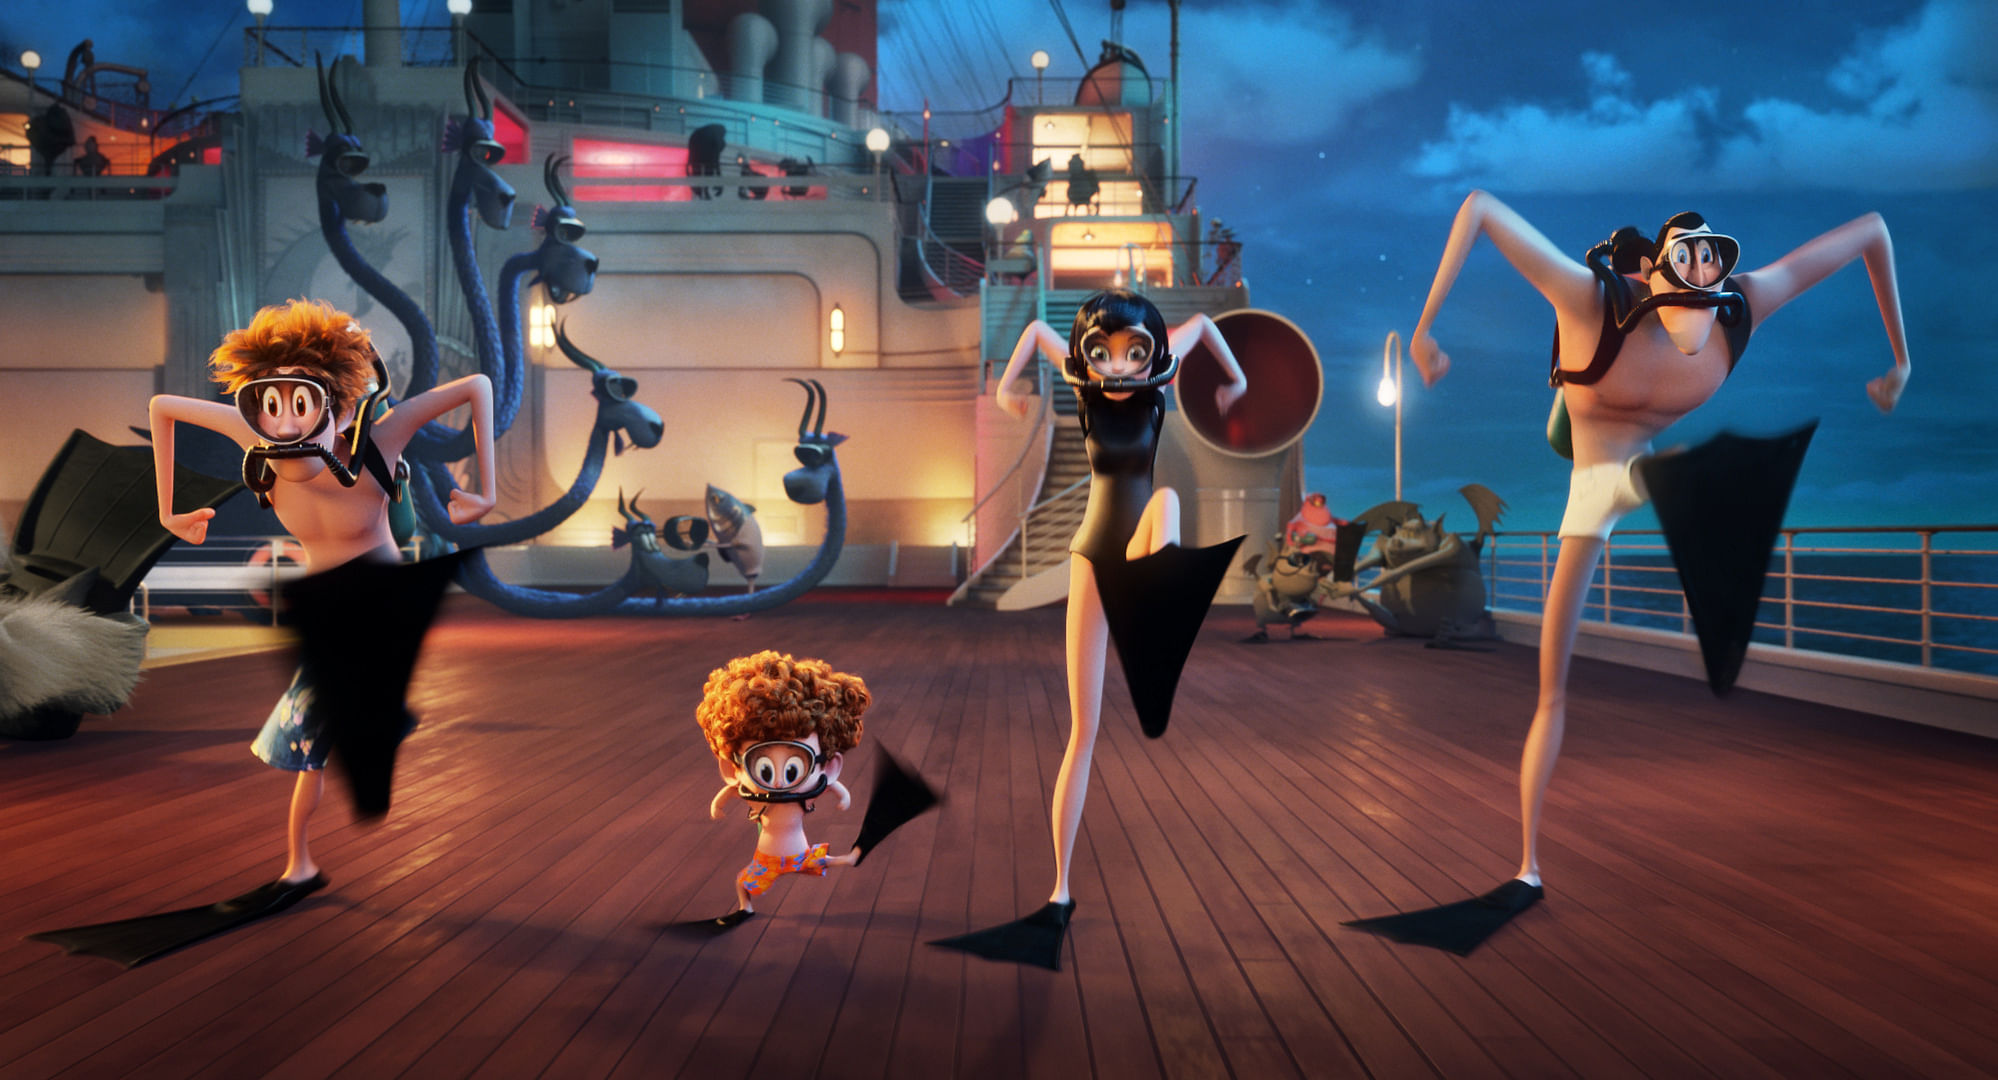 Hotel Transylvania 3--A Monster Vacation offers no great lessons, but it is compelling.